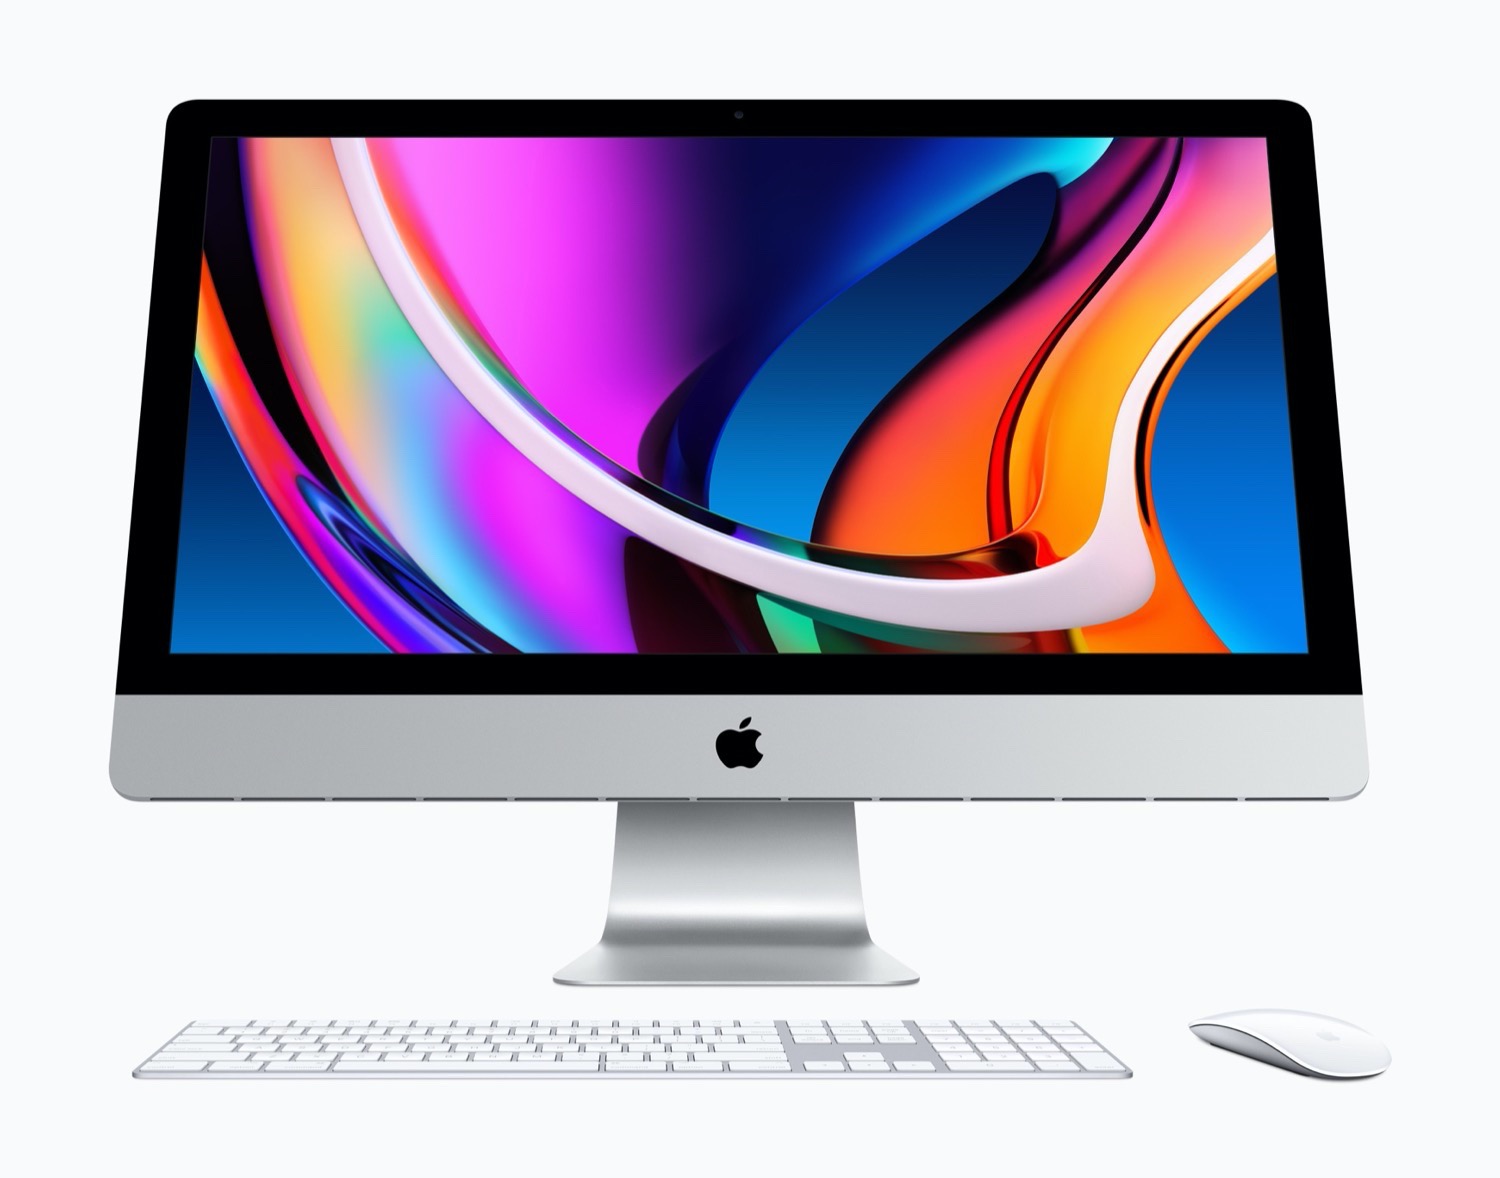 gordijn Afwijzen Aas Apple refreshes the 27-inch iMac; 21.5-inch iMac and iMac Pro upgraded too  - NotebookCheck.net News